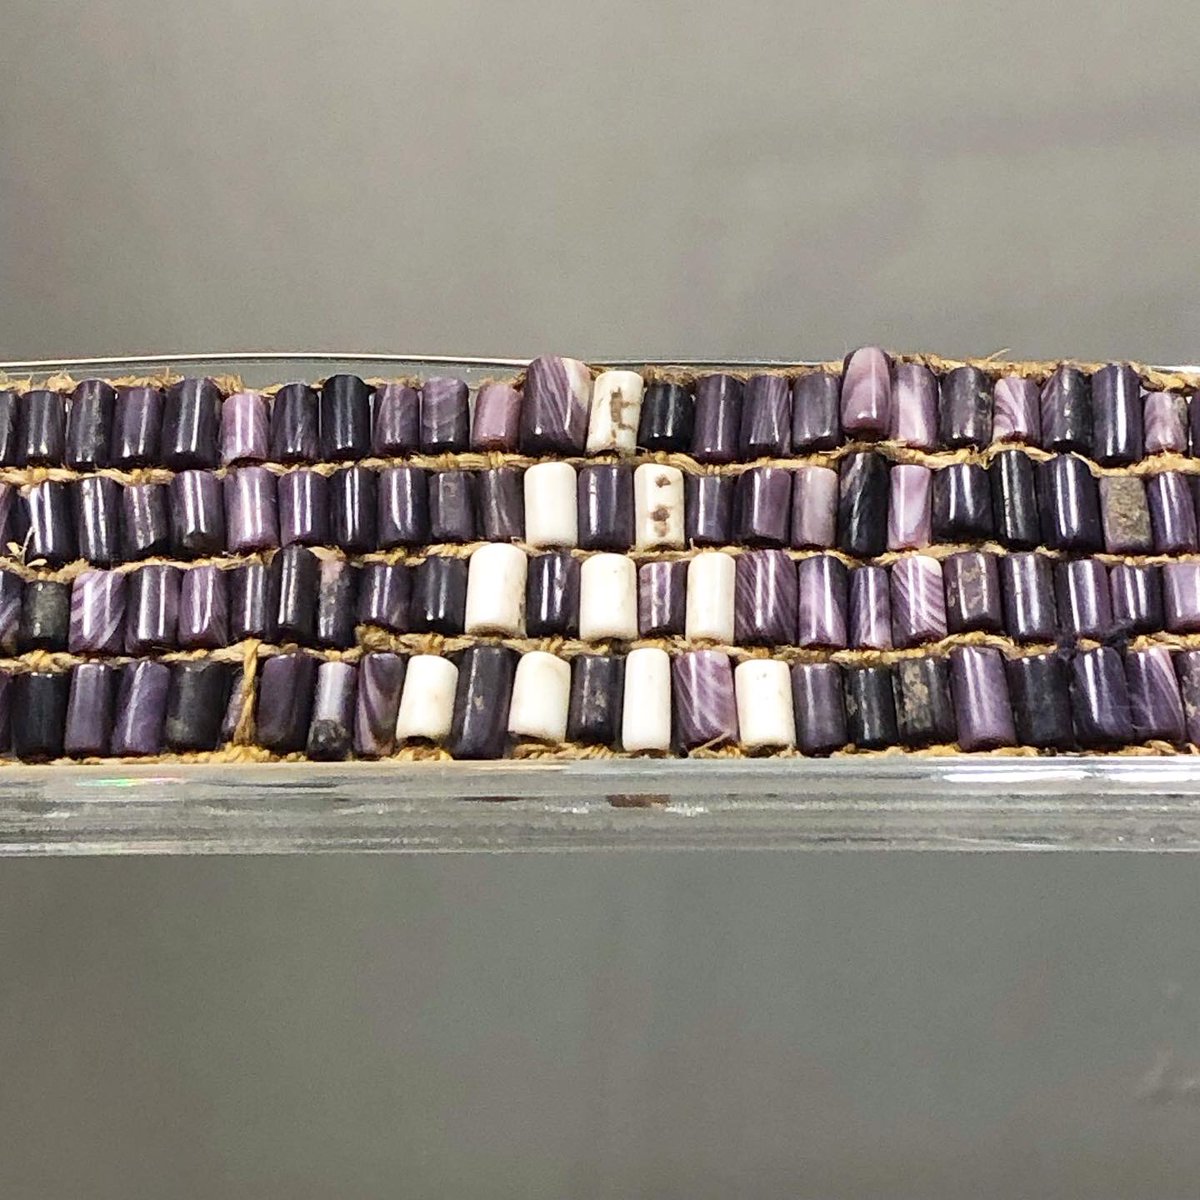 Wampum collar, traditionally attributed to the Mohegan sachem and “Friend of the English” Uncas (circa 1598- 1683 or 1684), the only known wampum to have remained in Native American hands since the 17th century. Now at the Tantaquidgeon Museum.

#VastEarlyAmerica #NativeAmerica